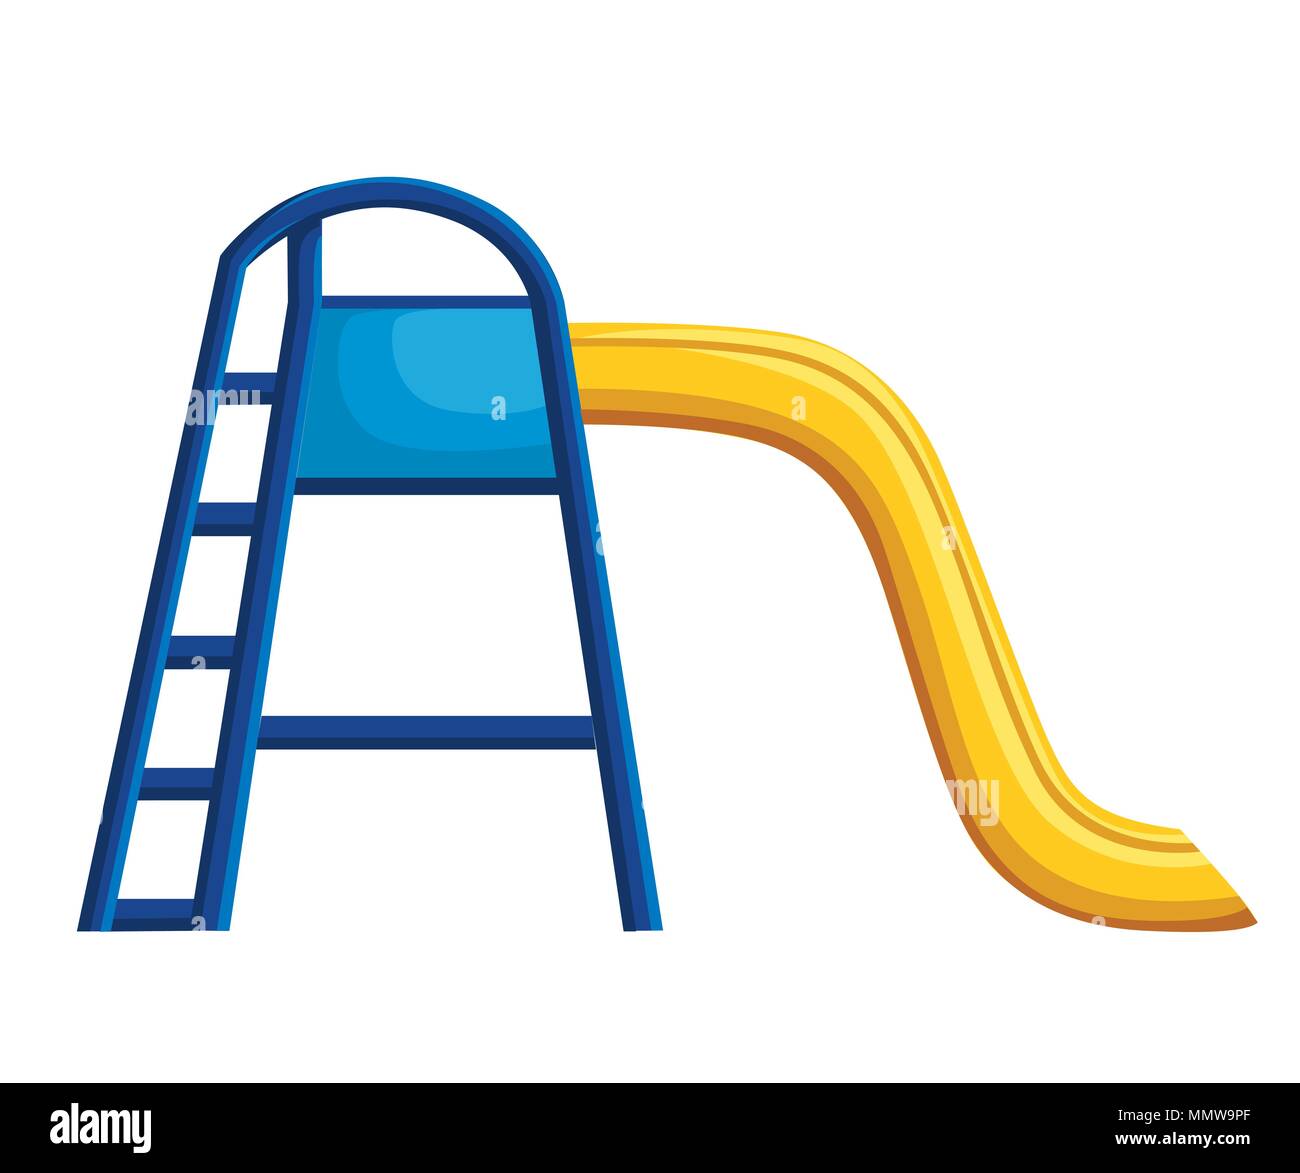 Childrens slide blue and yellow. Playground theme elements. Holiday childhood entertainment. Vector illustration isolated on white background. Stock Vector